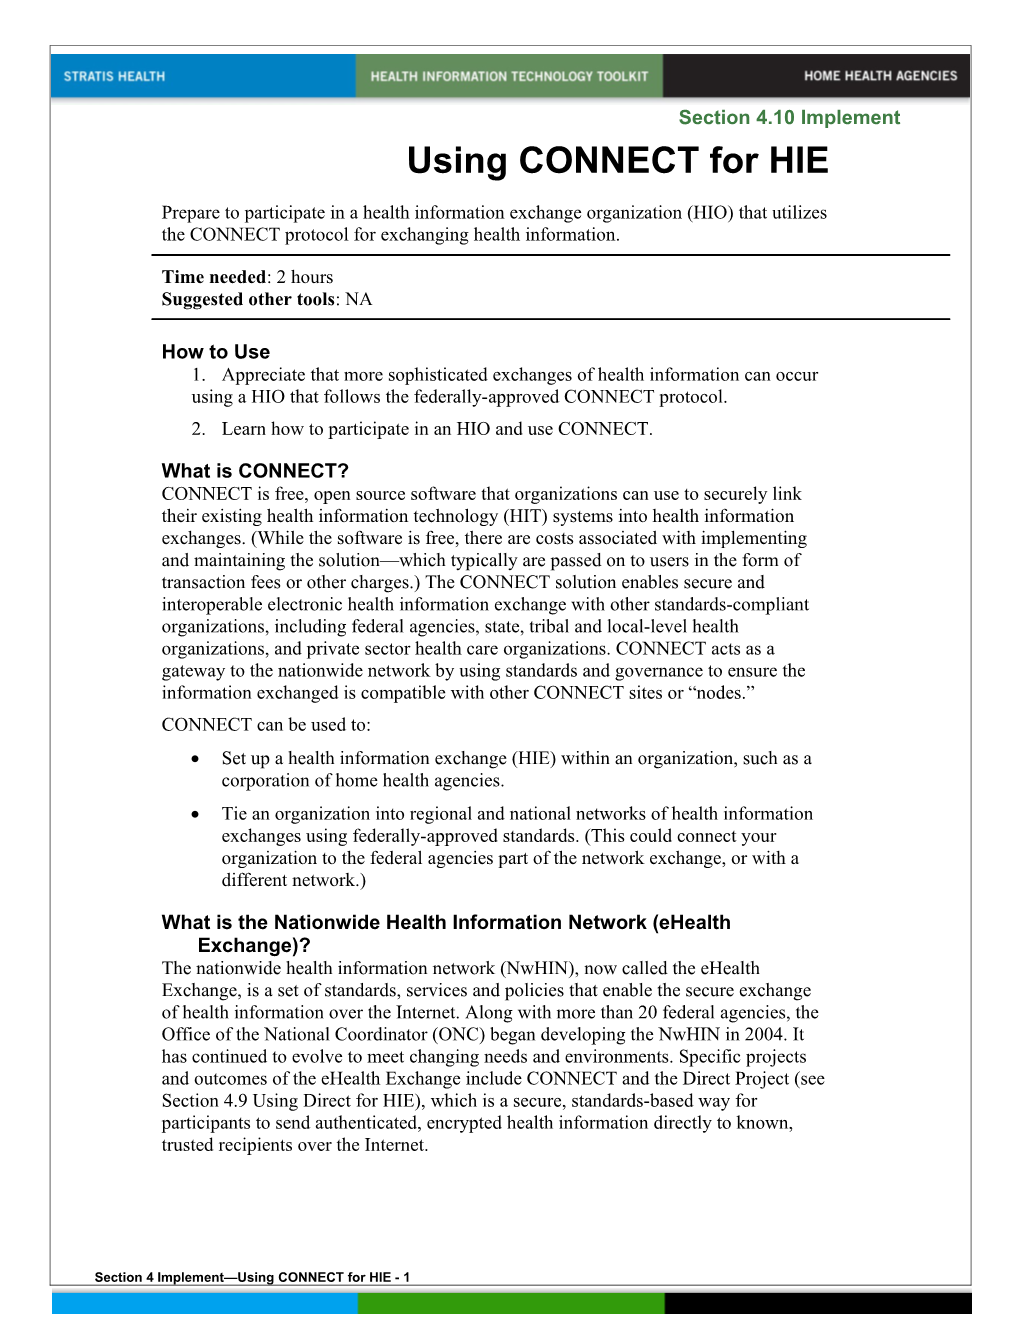 4 Using CONNECT for HIE